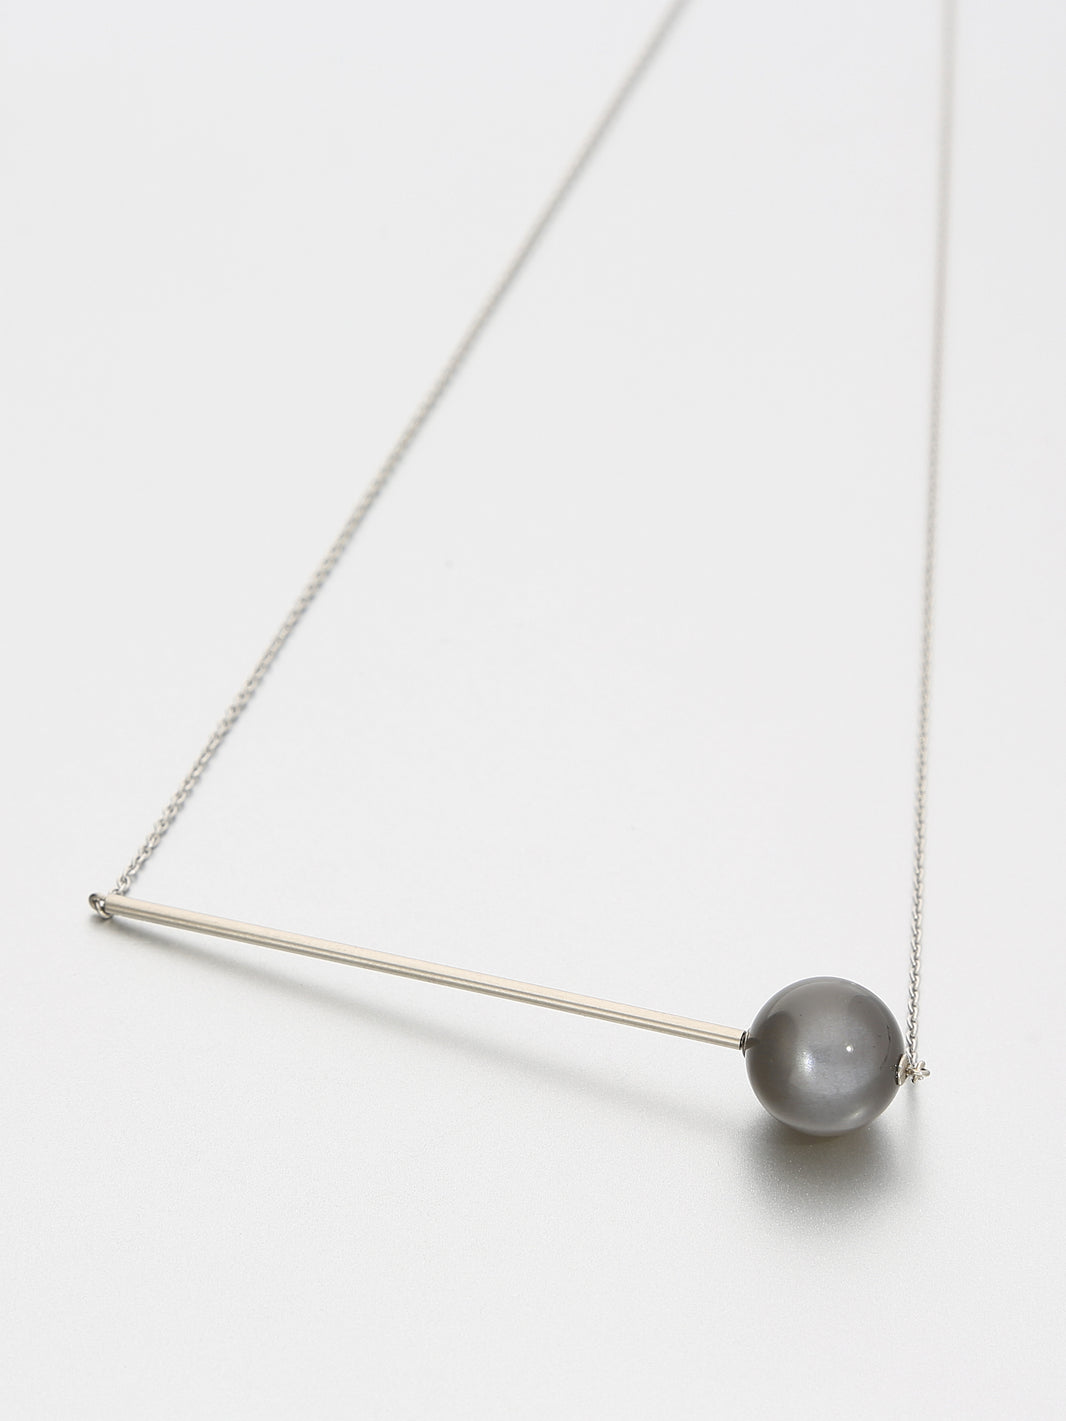 Abacus Moonstone Necklace, White gold with dark stormy grey moonstone 12 mm